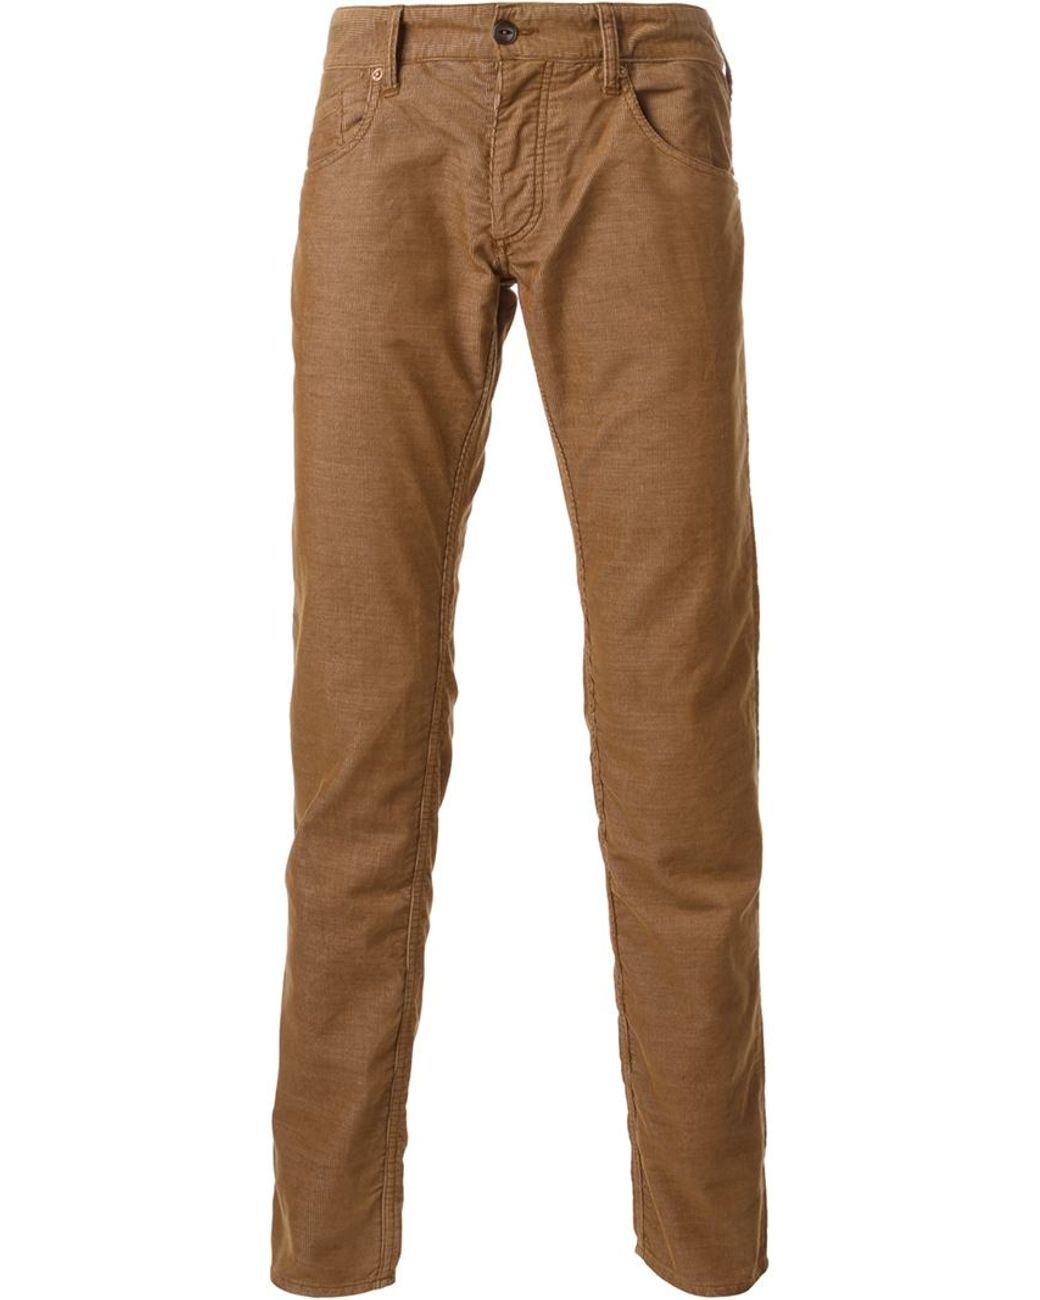 Armani Jeans Corduroy Slim Fit Trousers in Brown for Men | Lyst